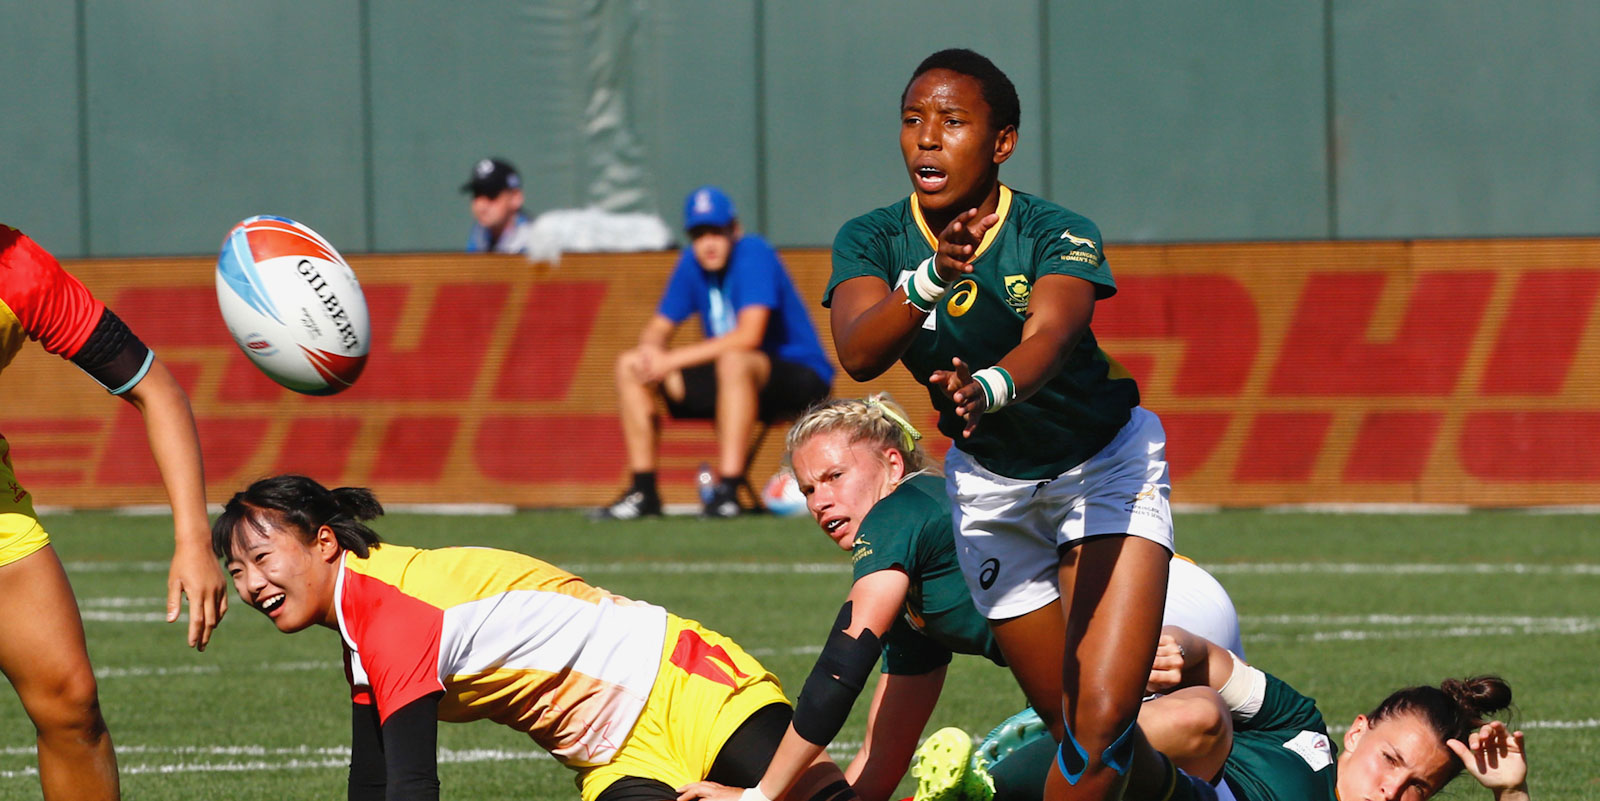 Shozi in action against China at the 2018 RWC7s in San Francisco